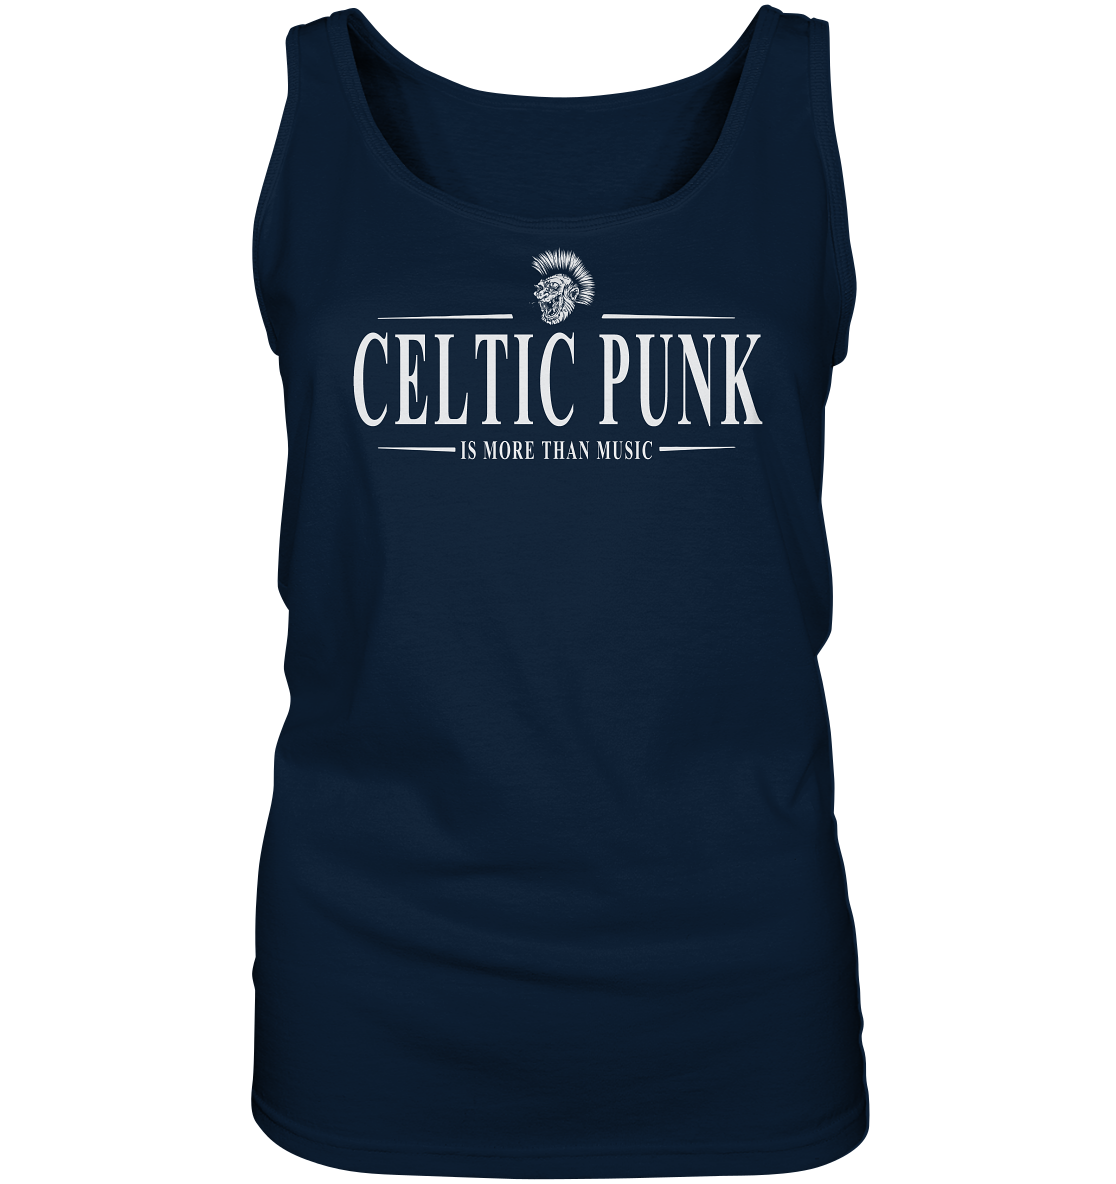 Celtic Punk "Is More Than Music" - Ladies Tank-Top